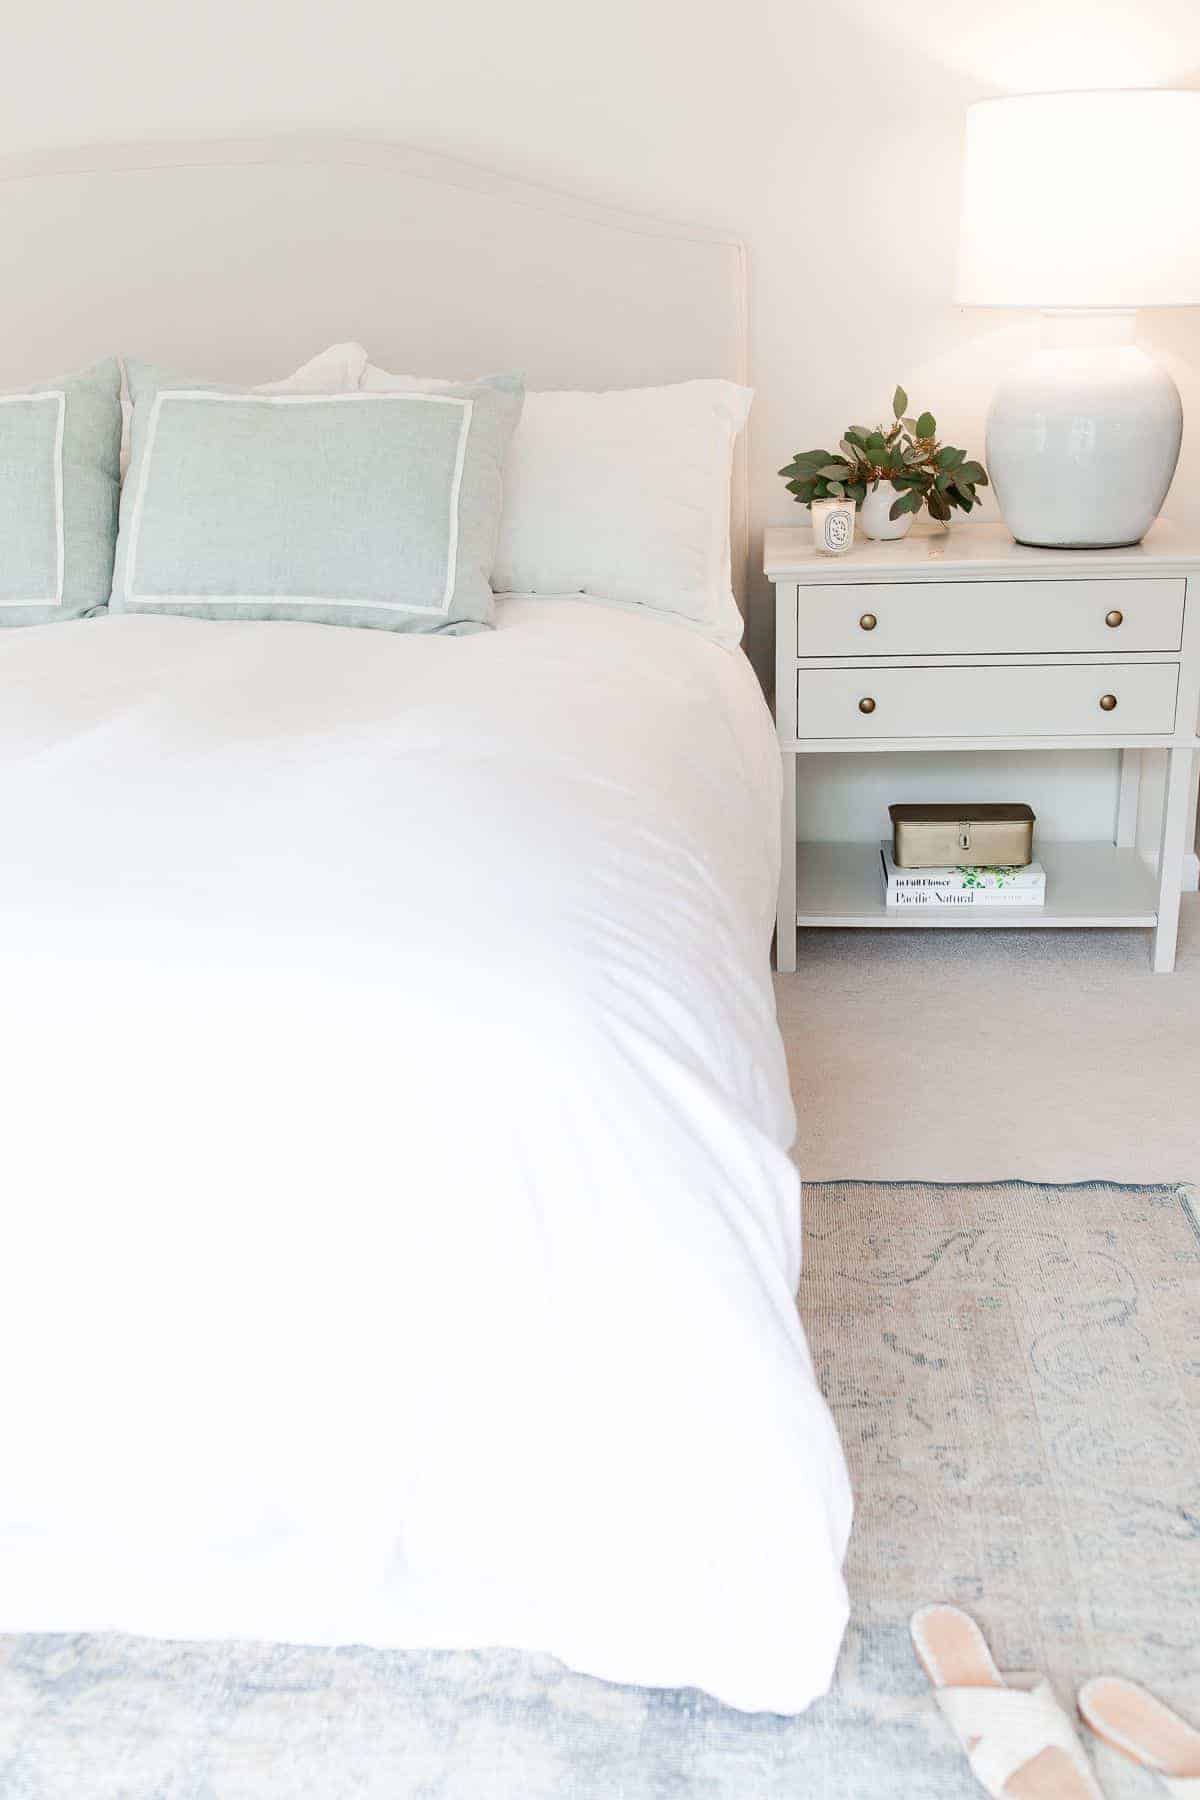 A white bedroom with a bedroom rug placement of a vintage rug under the bed.